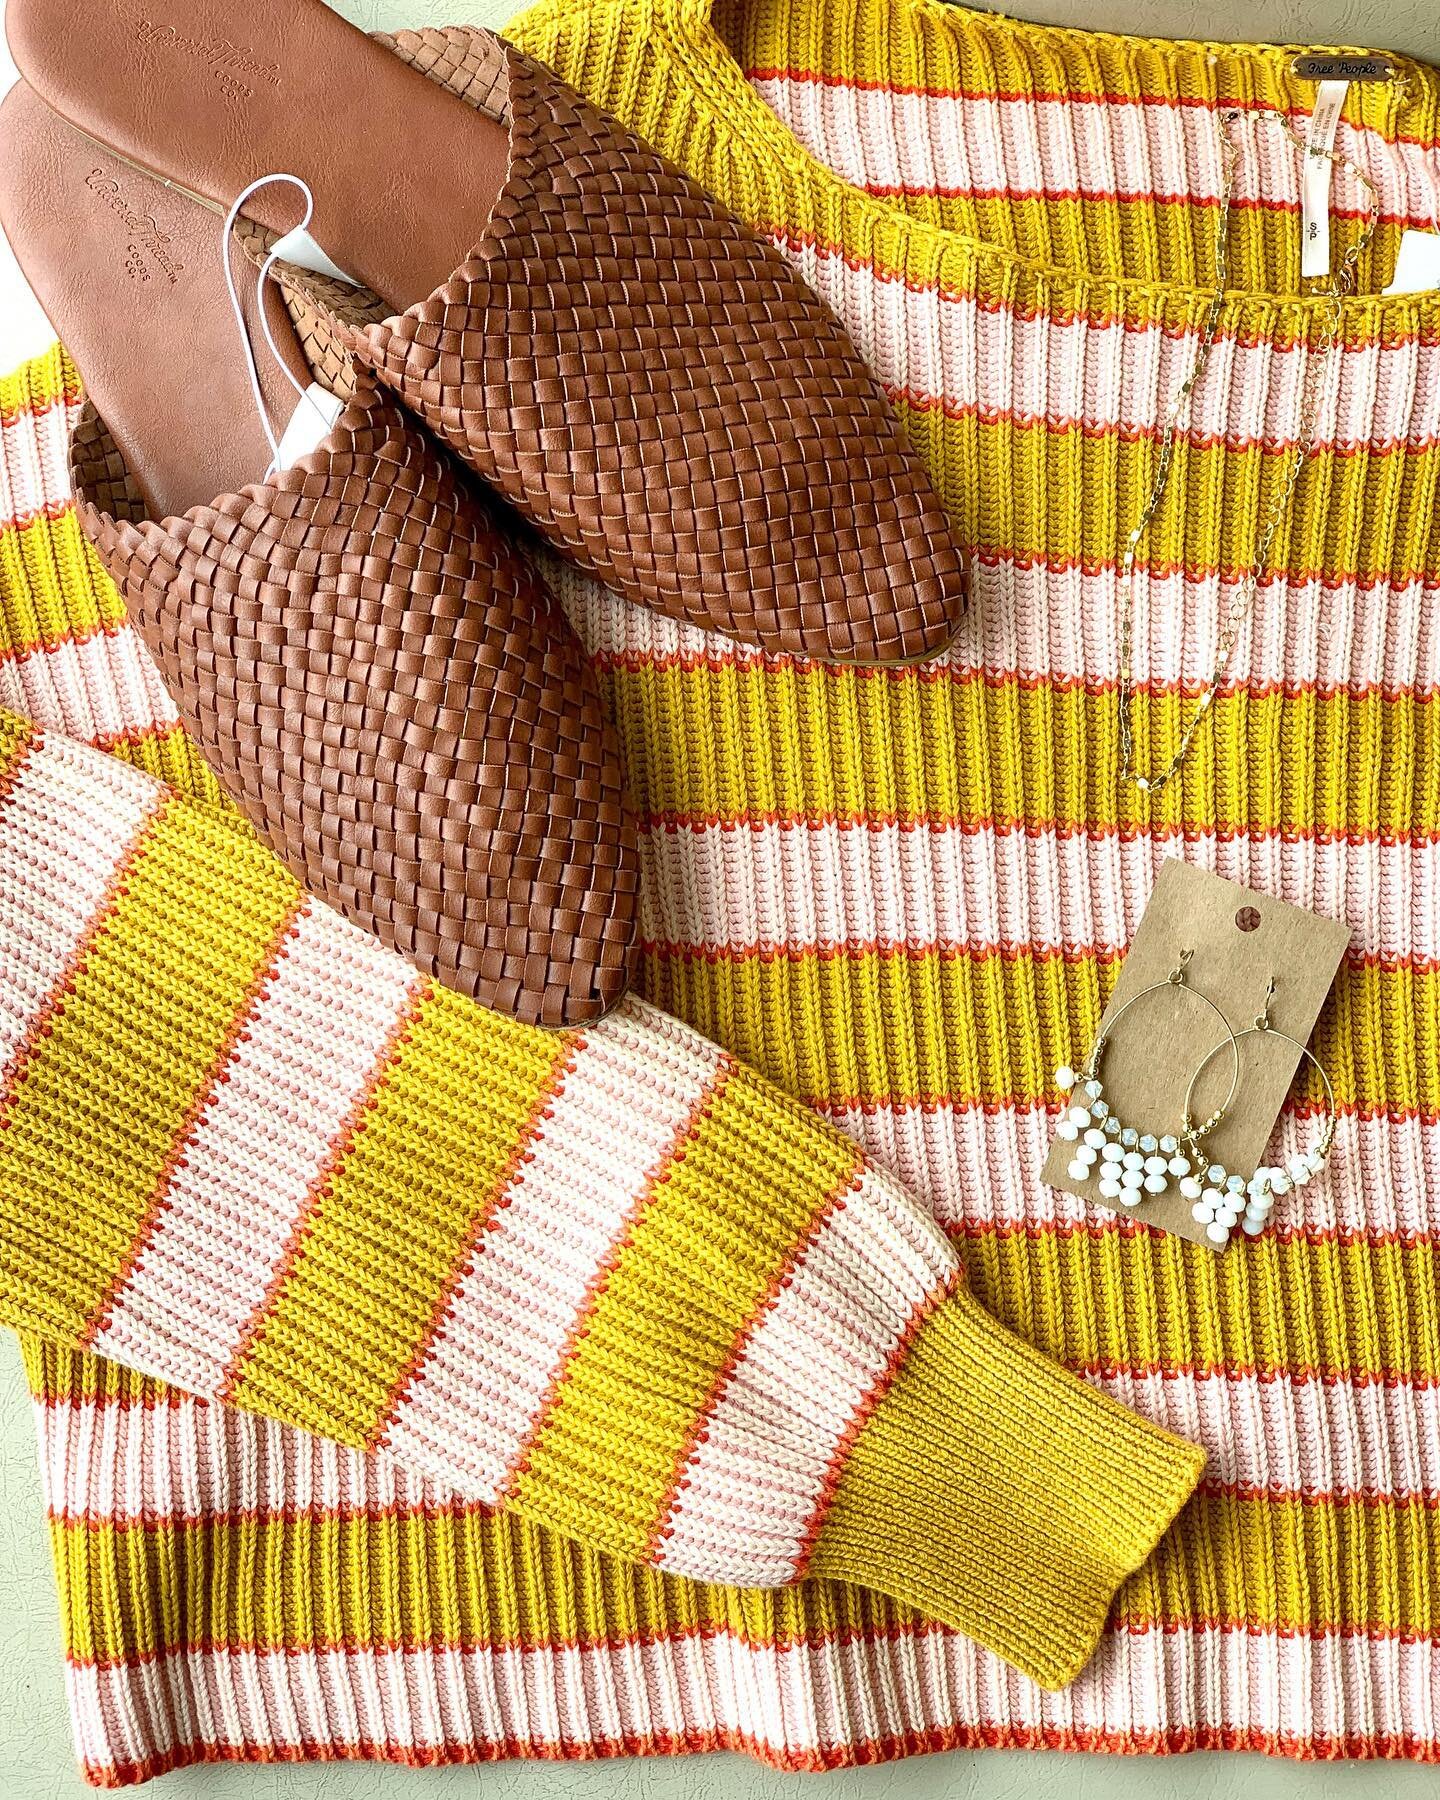 It&rsquo;s finally starting to feel like spring! We&rsquo;re ready for sunshine + bright colors ☀️

✨Cropped Free People Sweater, Small, $14.99
✨Woven flats, Size 12, $7
✨Beaded Earrings, $2.49
✨Gold Necklace, $2.49